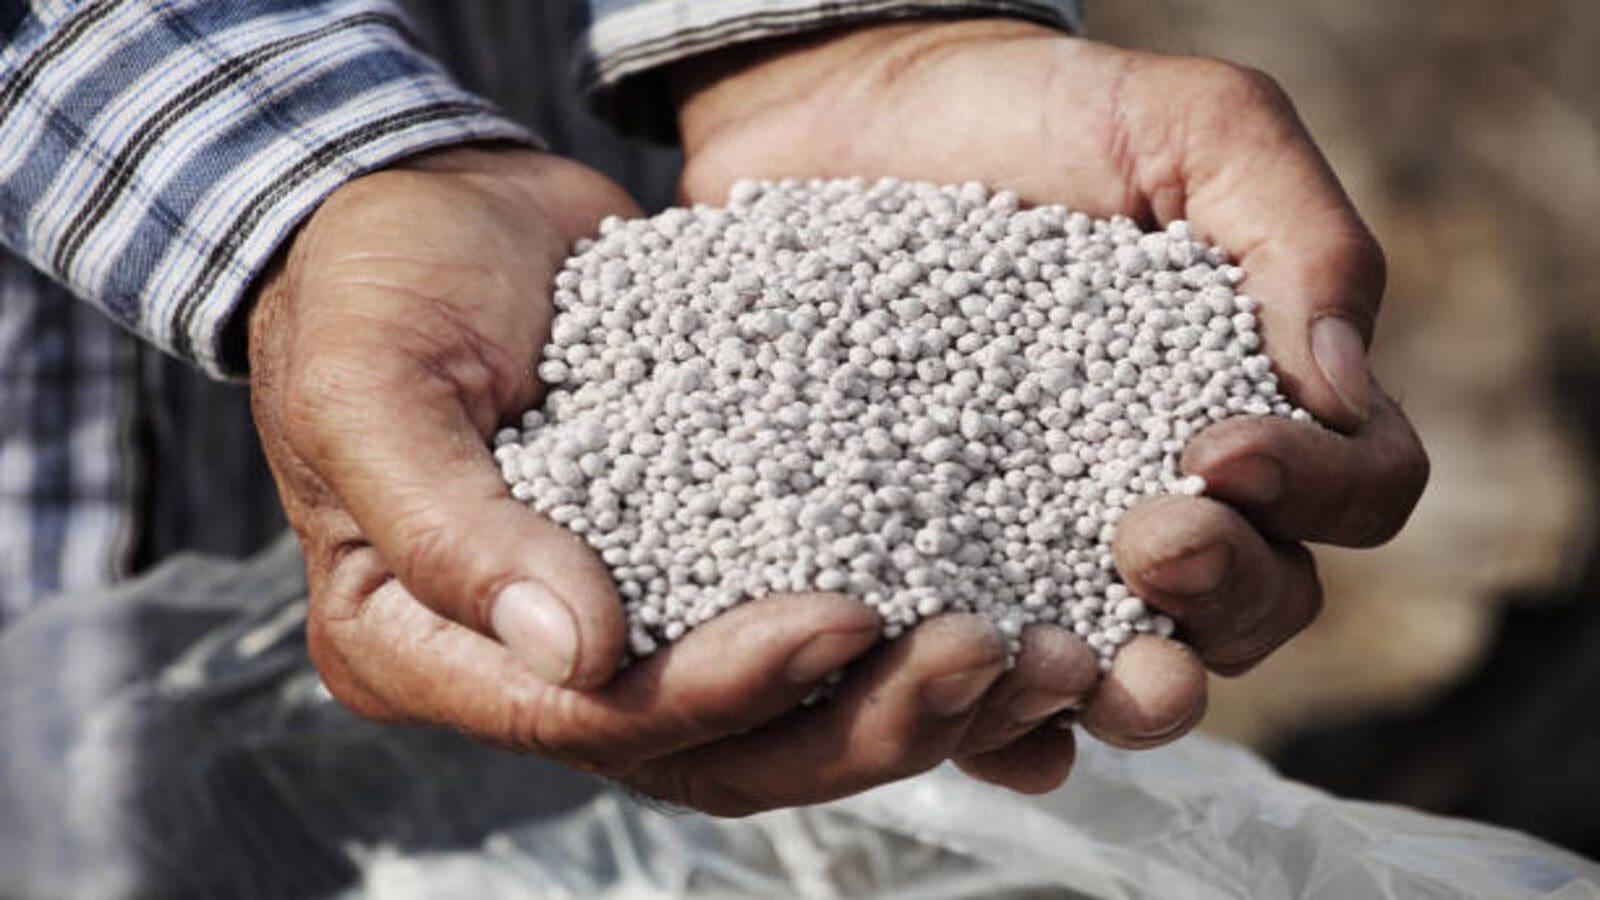 Russian company, PhosAgro Group, to increase fertilizer supply in Africa